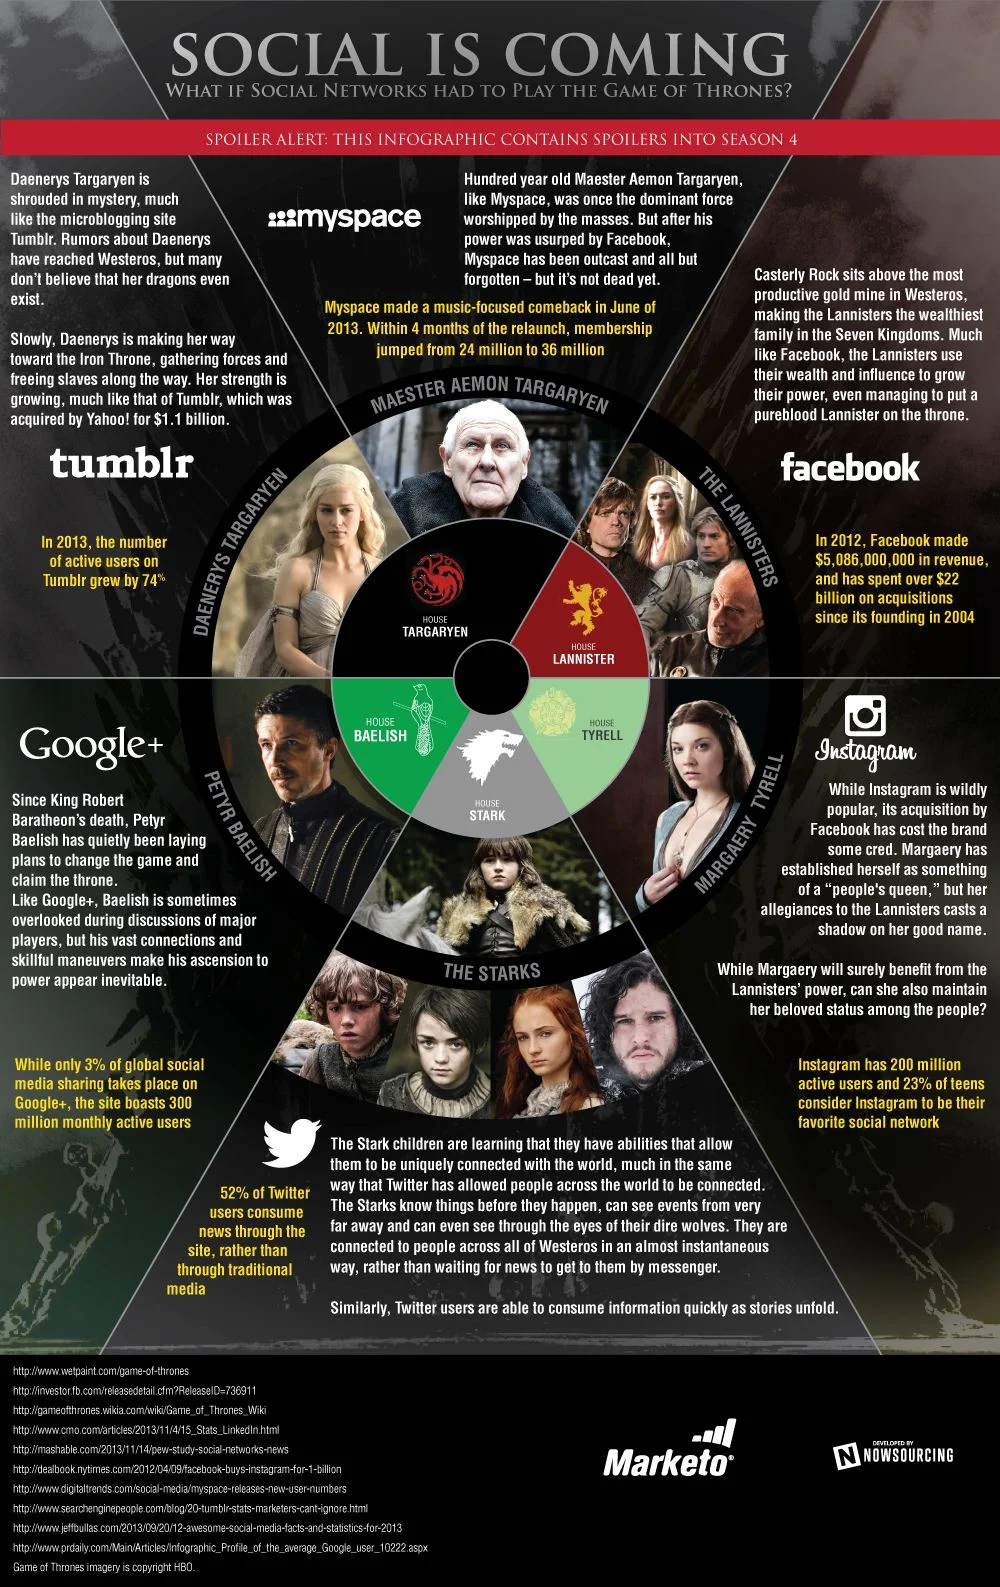 Social is Coming: If Googleplus, Facebook, Myspace, Twitter, Tumblr, Instagram Played the Game of Thrones #Infographic #socialmedia